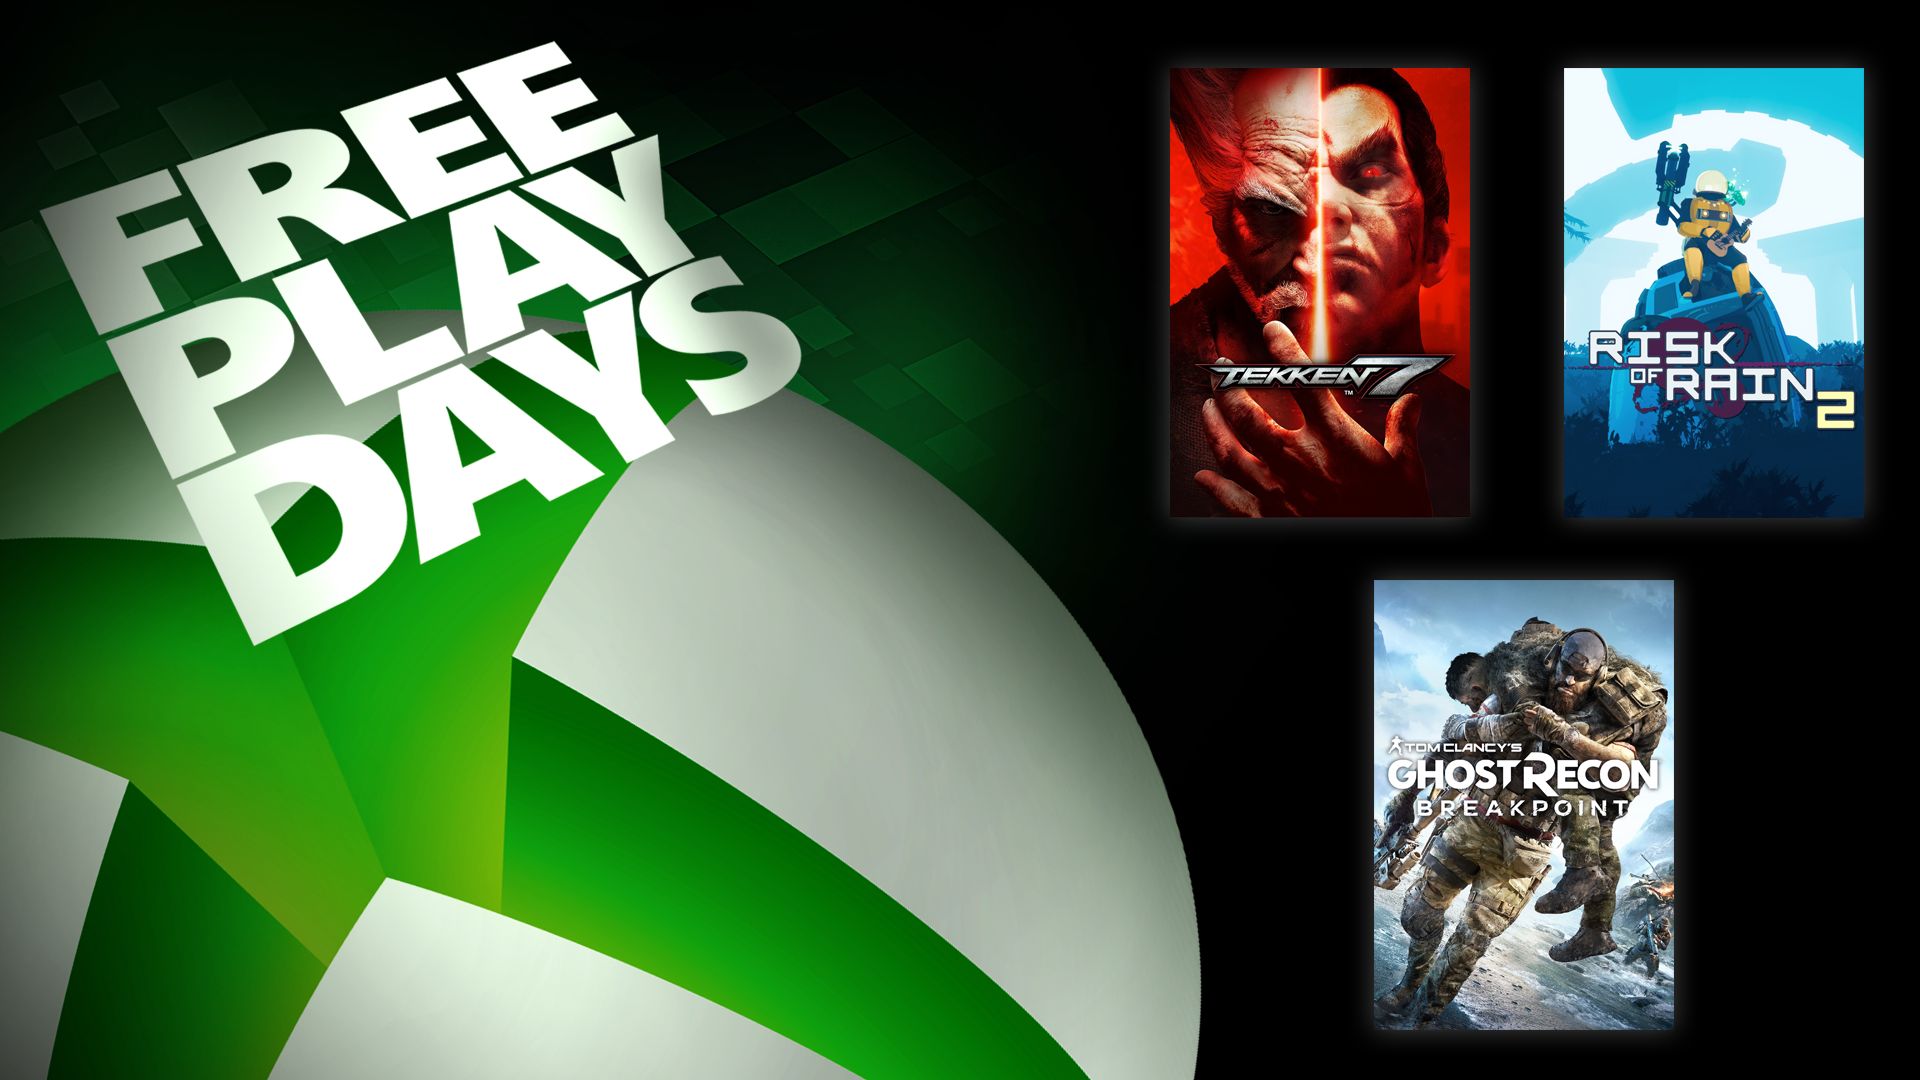 Free Play Days - Tekken 7, Tom Clancy's Ghost Recon Breakpoint, and Danger of Rain 2